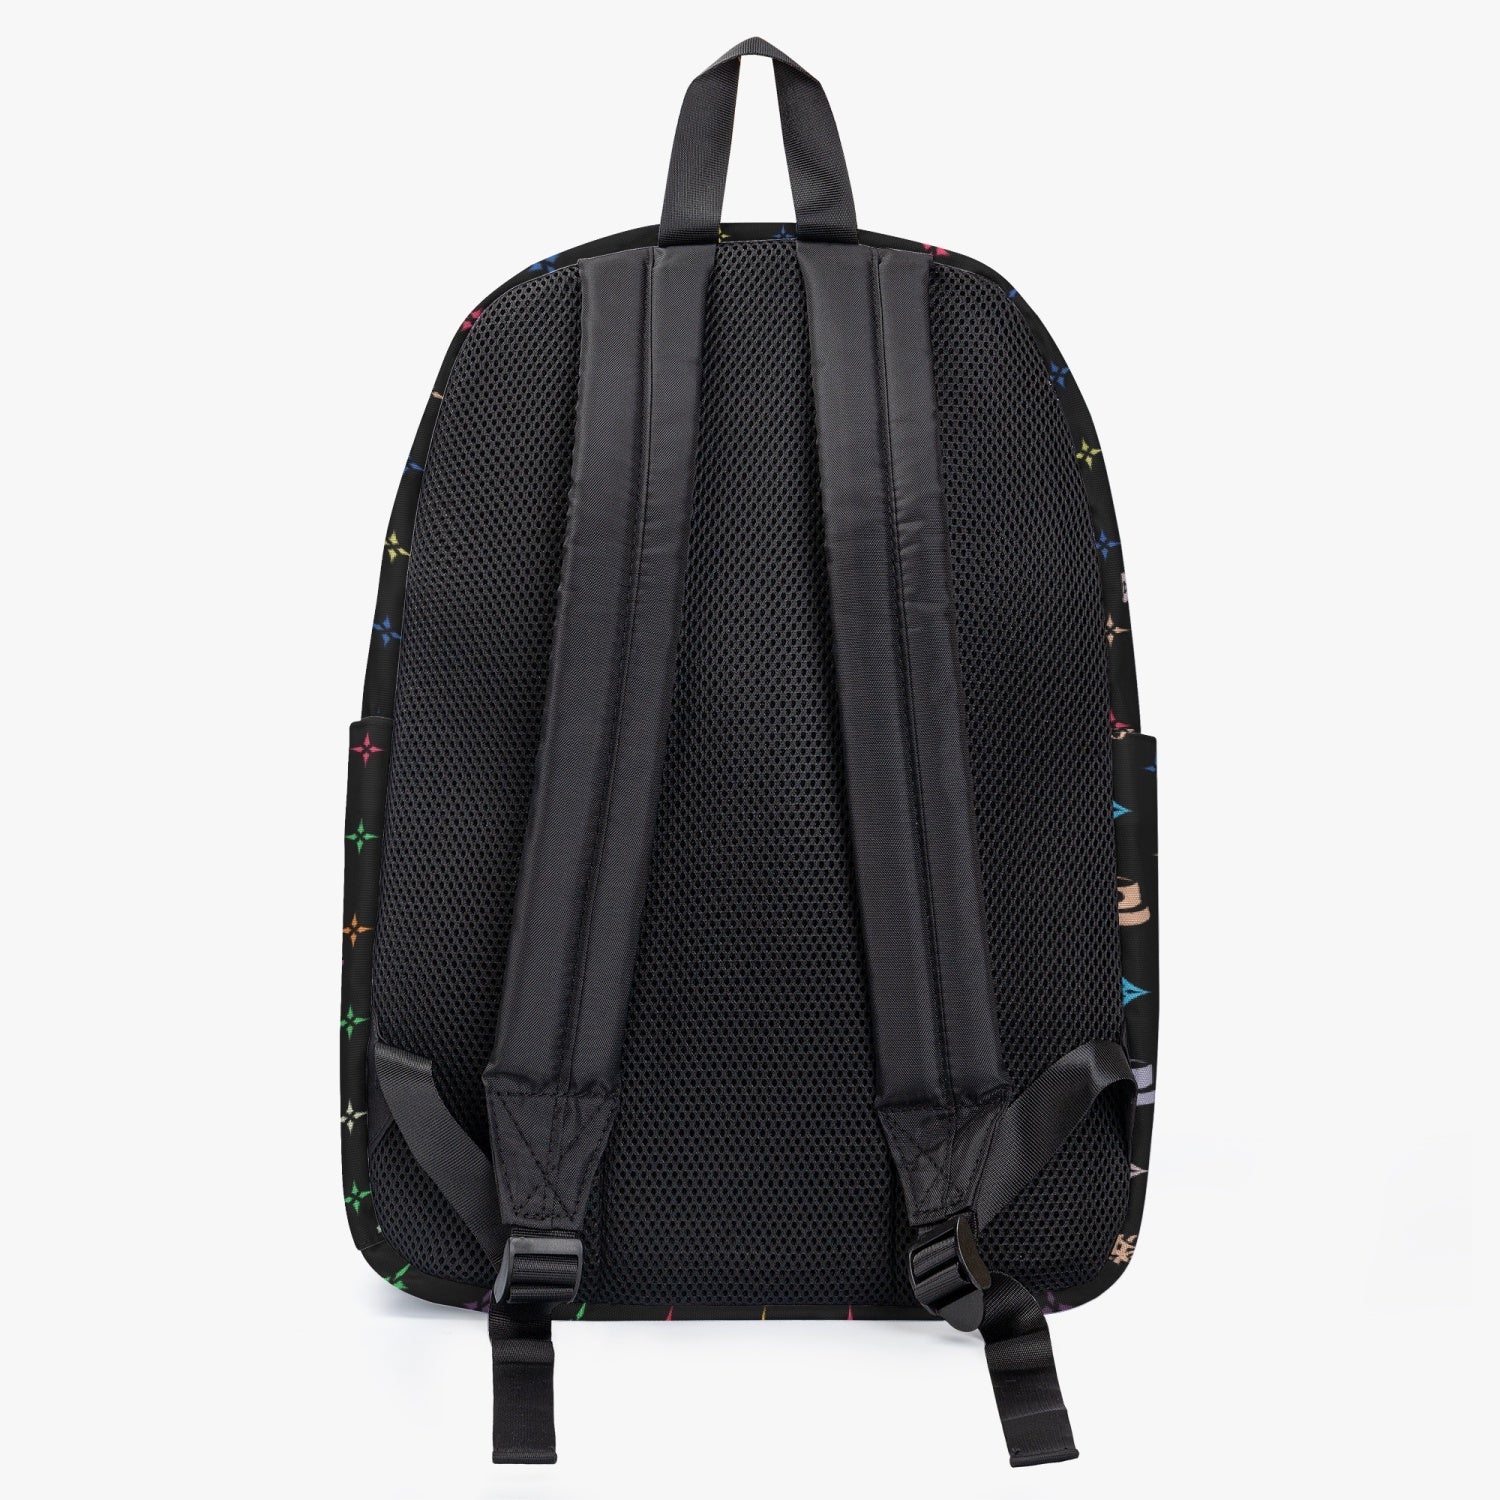 THE LOUIE CANVAS BACKPACK - Panic 39